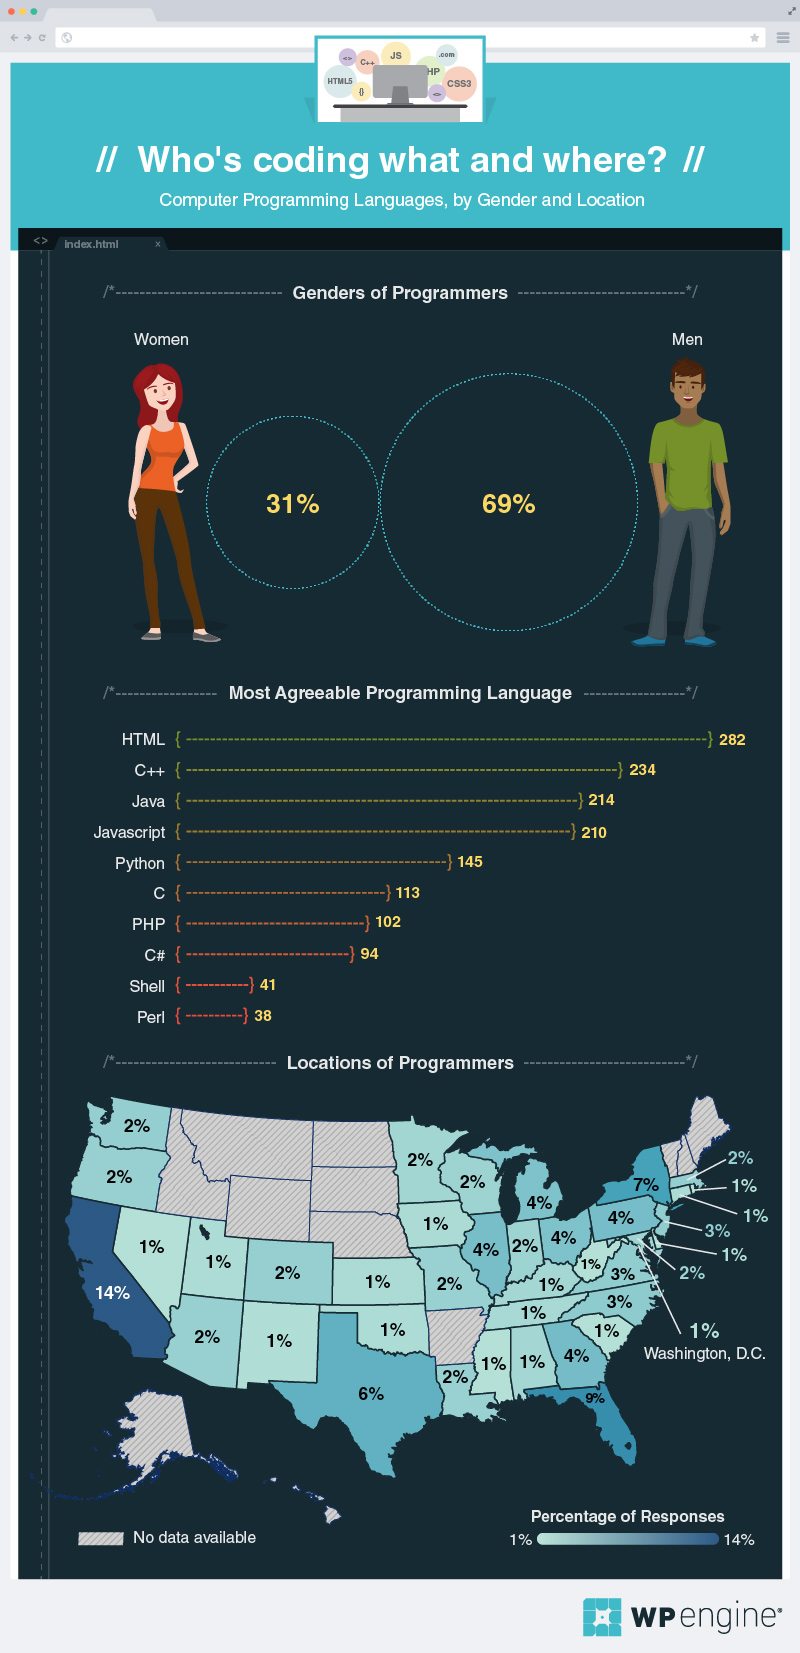 who's coding what and where? Computer programming languages, by gender and location